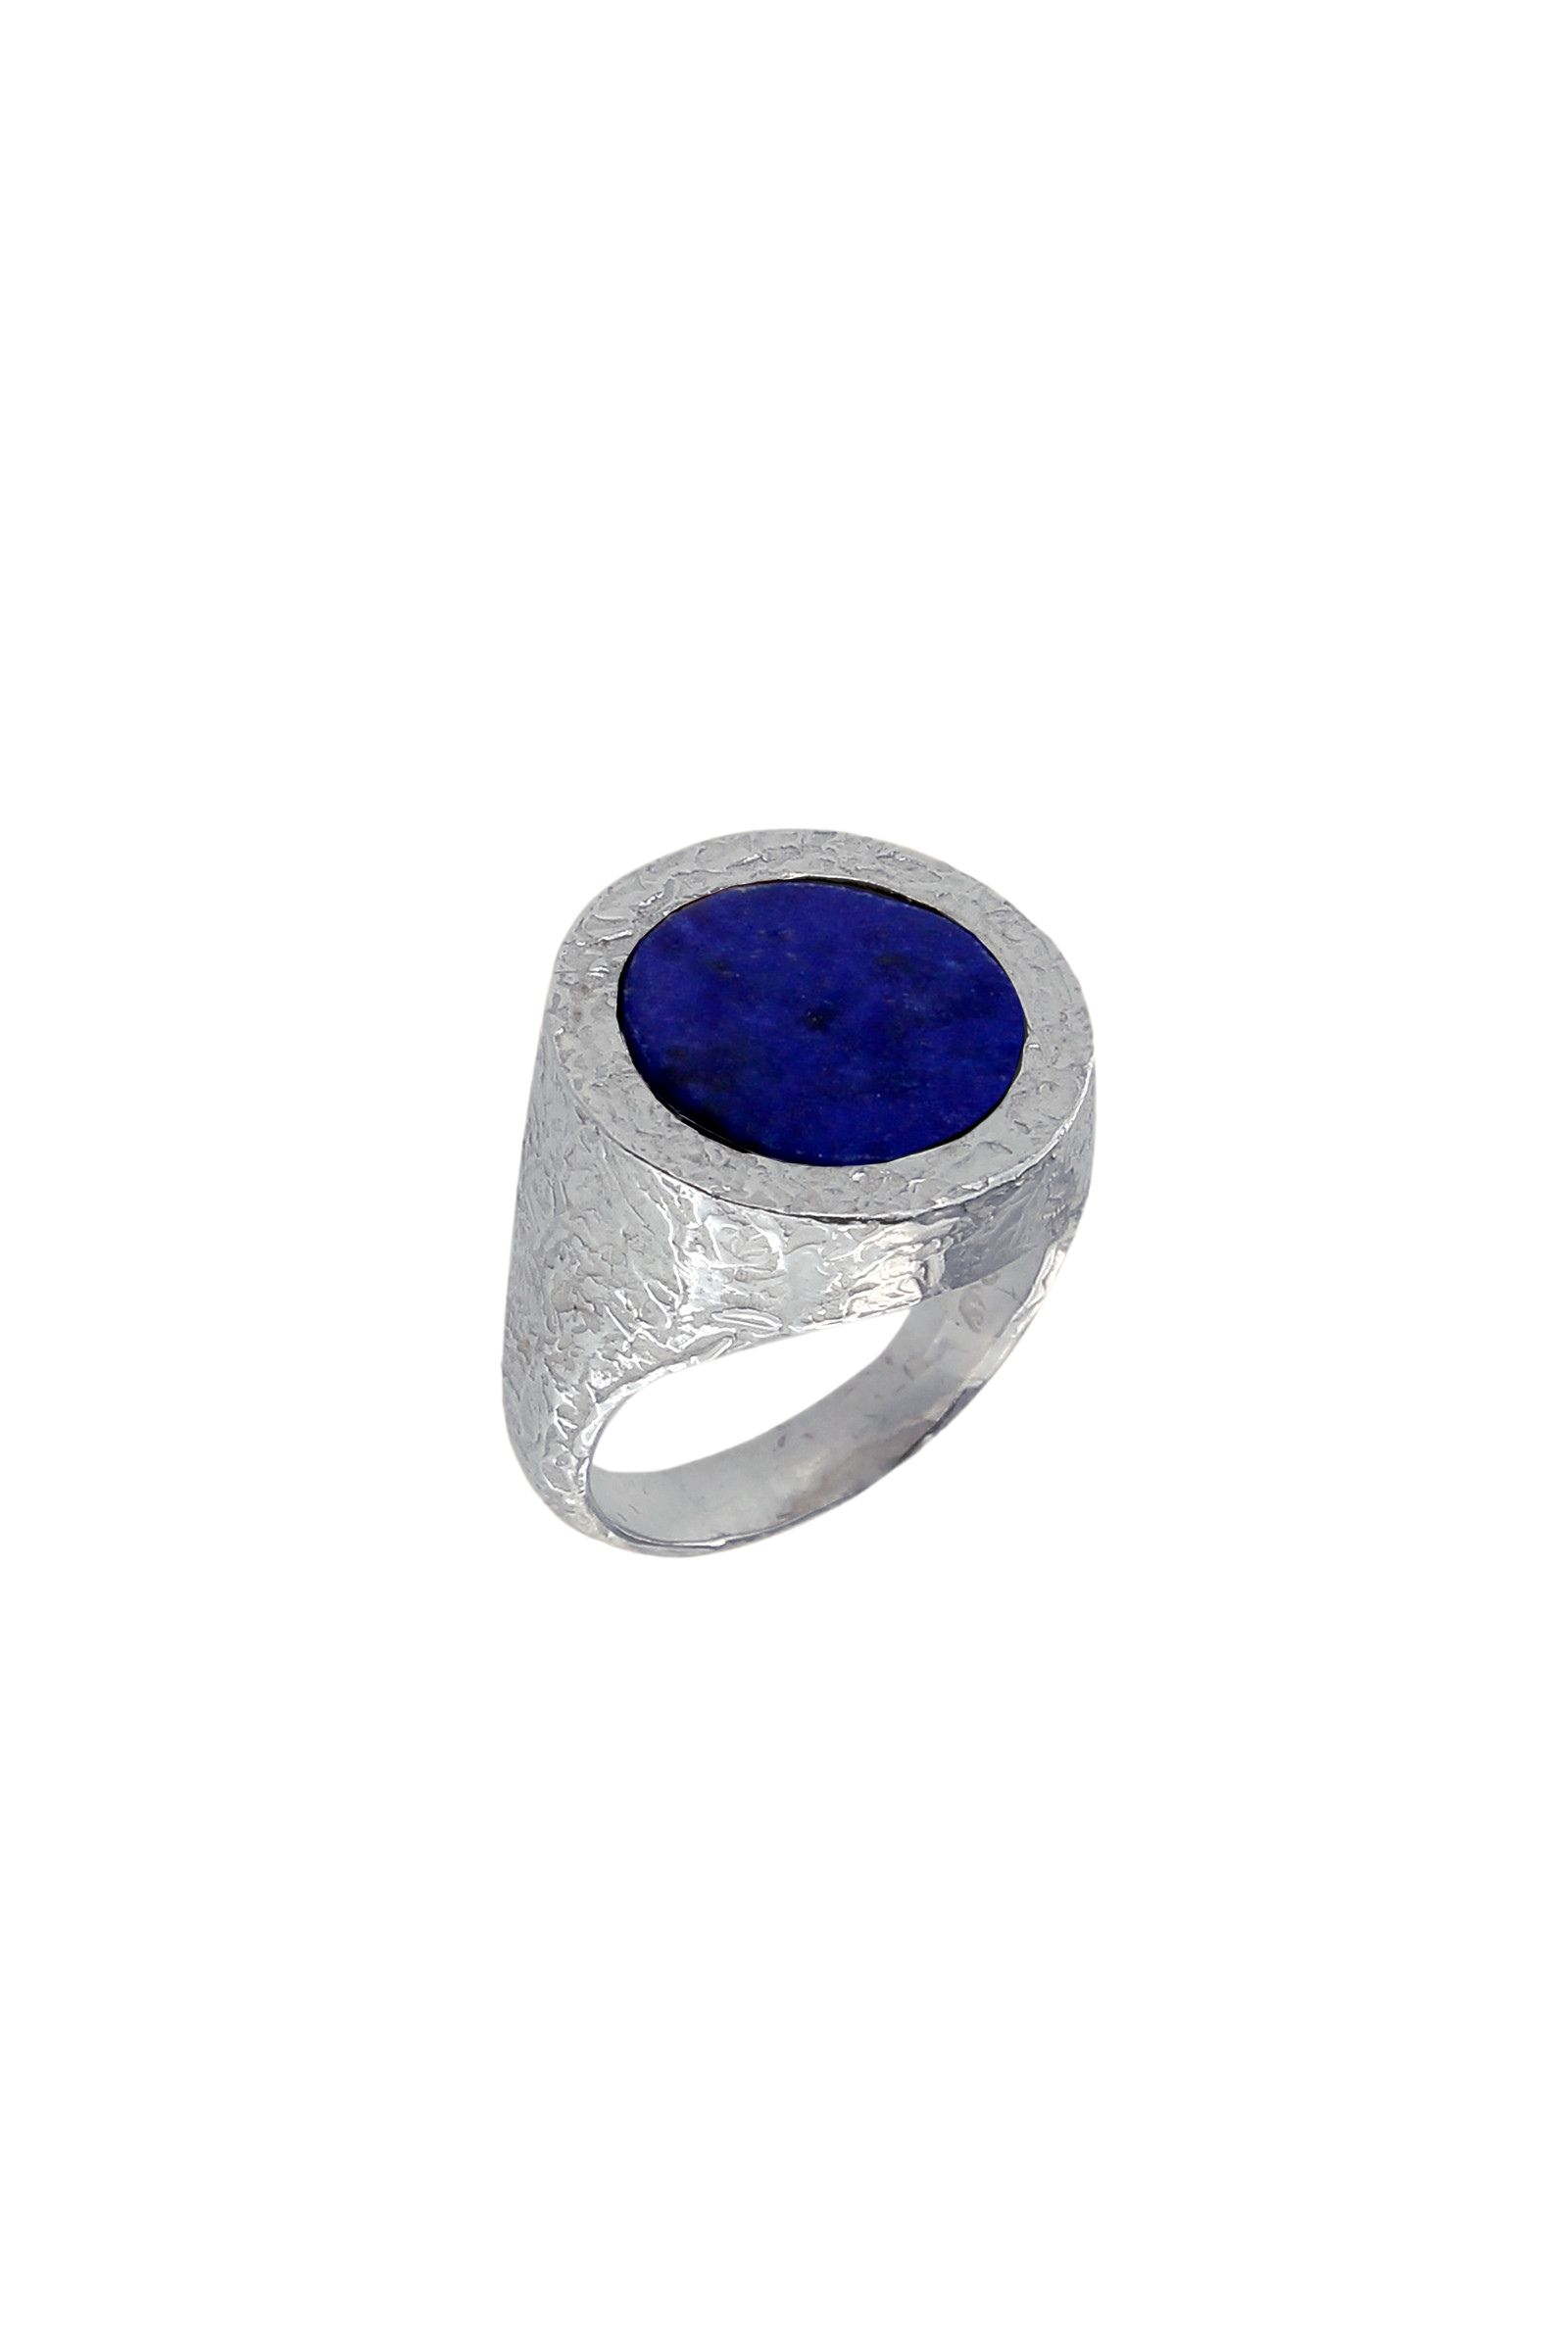 AE651-Lapis-Sterling-Silver-925-Signet-Ring-with-Lapislazzuli-1_